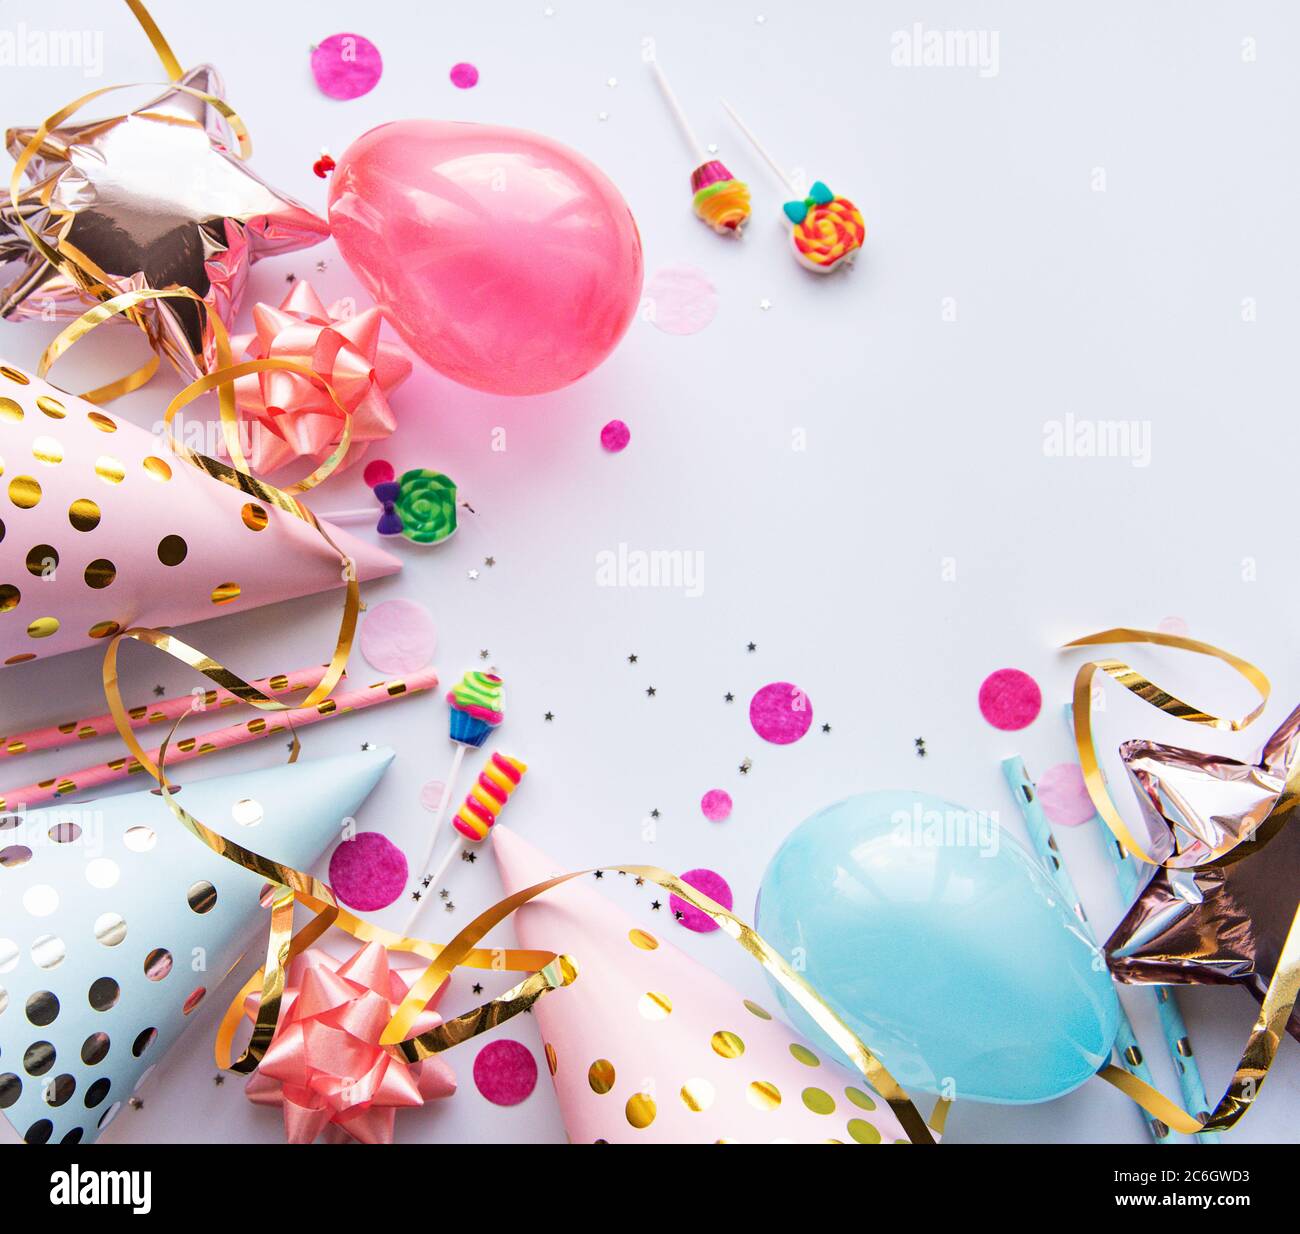 Happy birthday or party background. Flat Lay wtih birthday balloons ,  confetti and ribbons on white background. Top View. Copy space Stock Photo  - Alamy